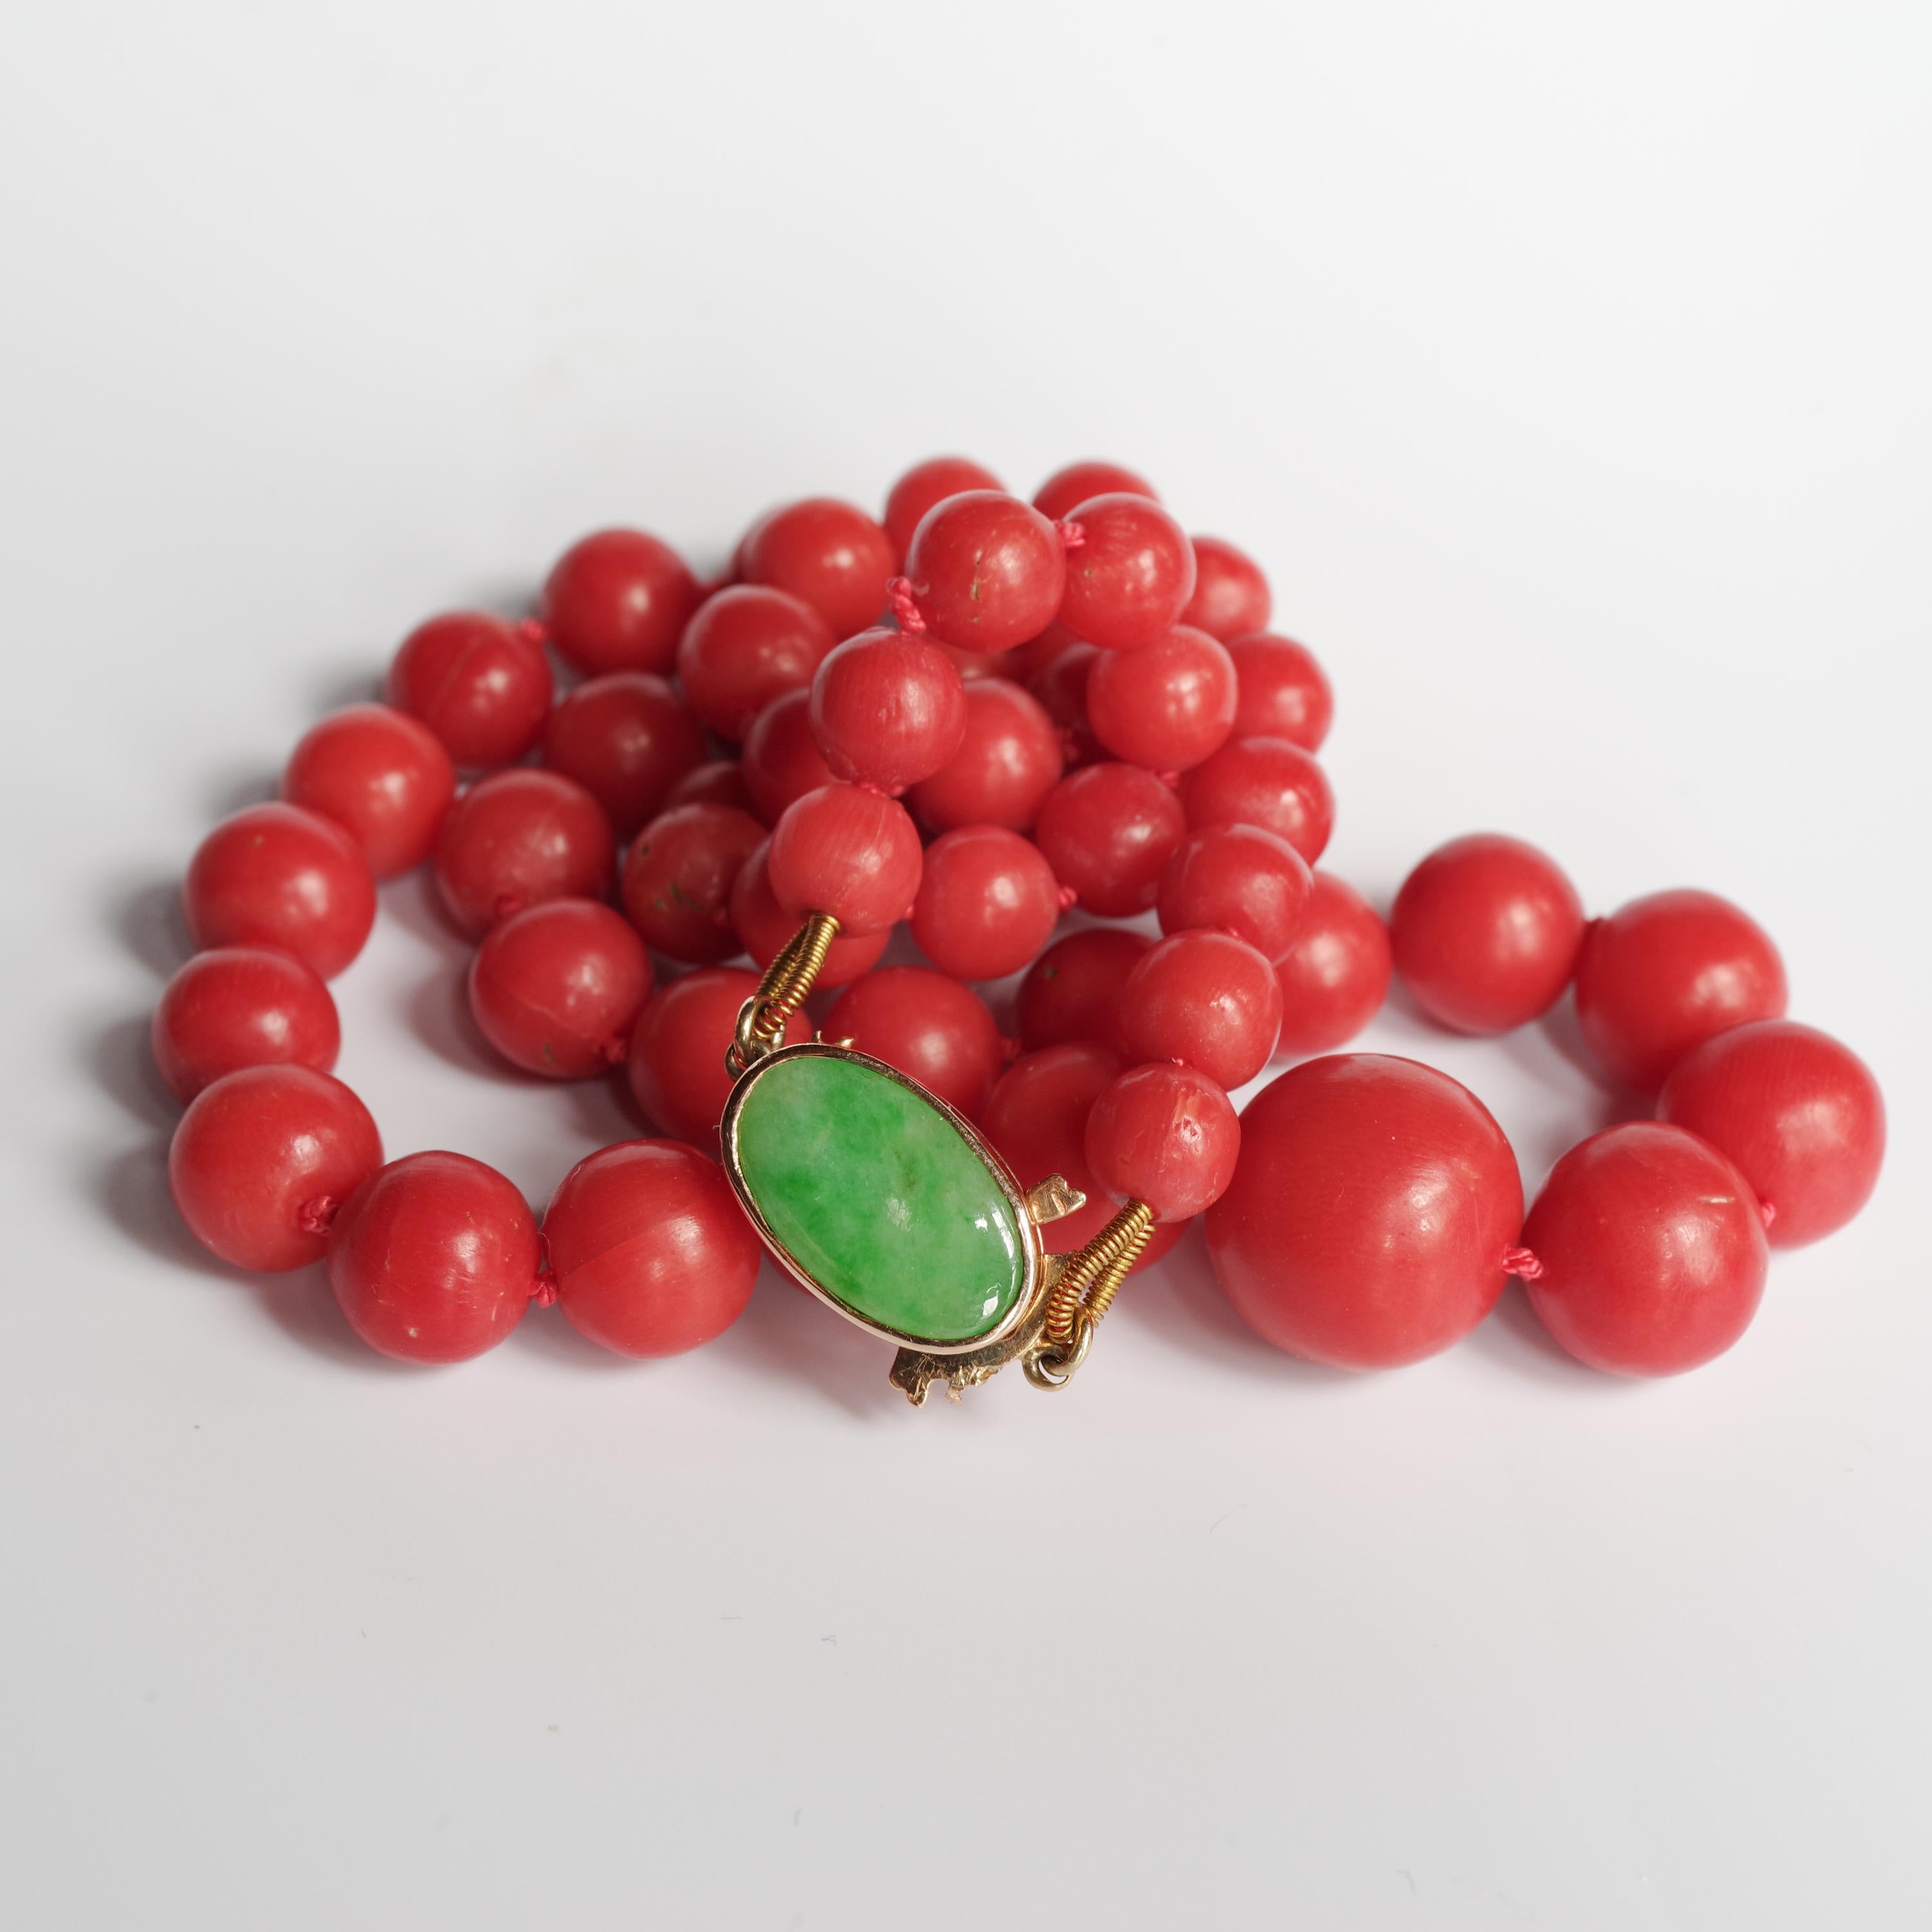 This fine precious coral necklace is composed of 55 hand-carved and polished natural undyed tomato-red coral beads that are graduated in size from 6.38 mm to 13.30 mm, which is ideal for an 18